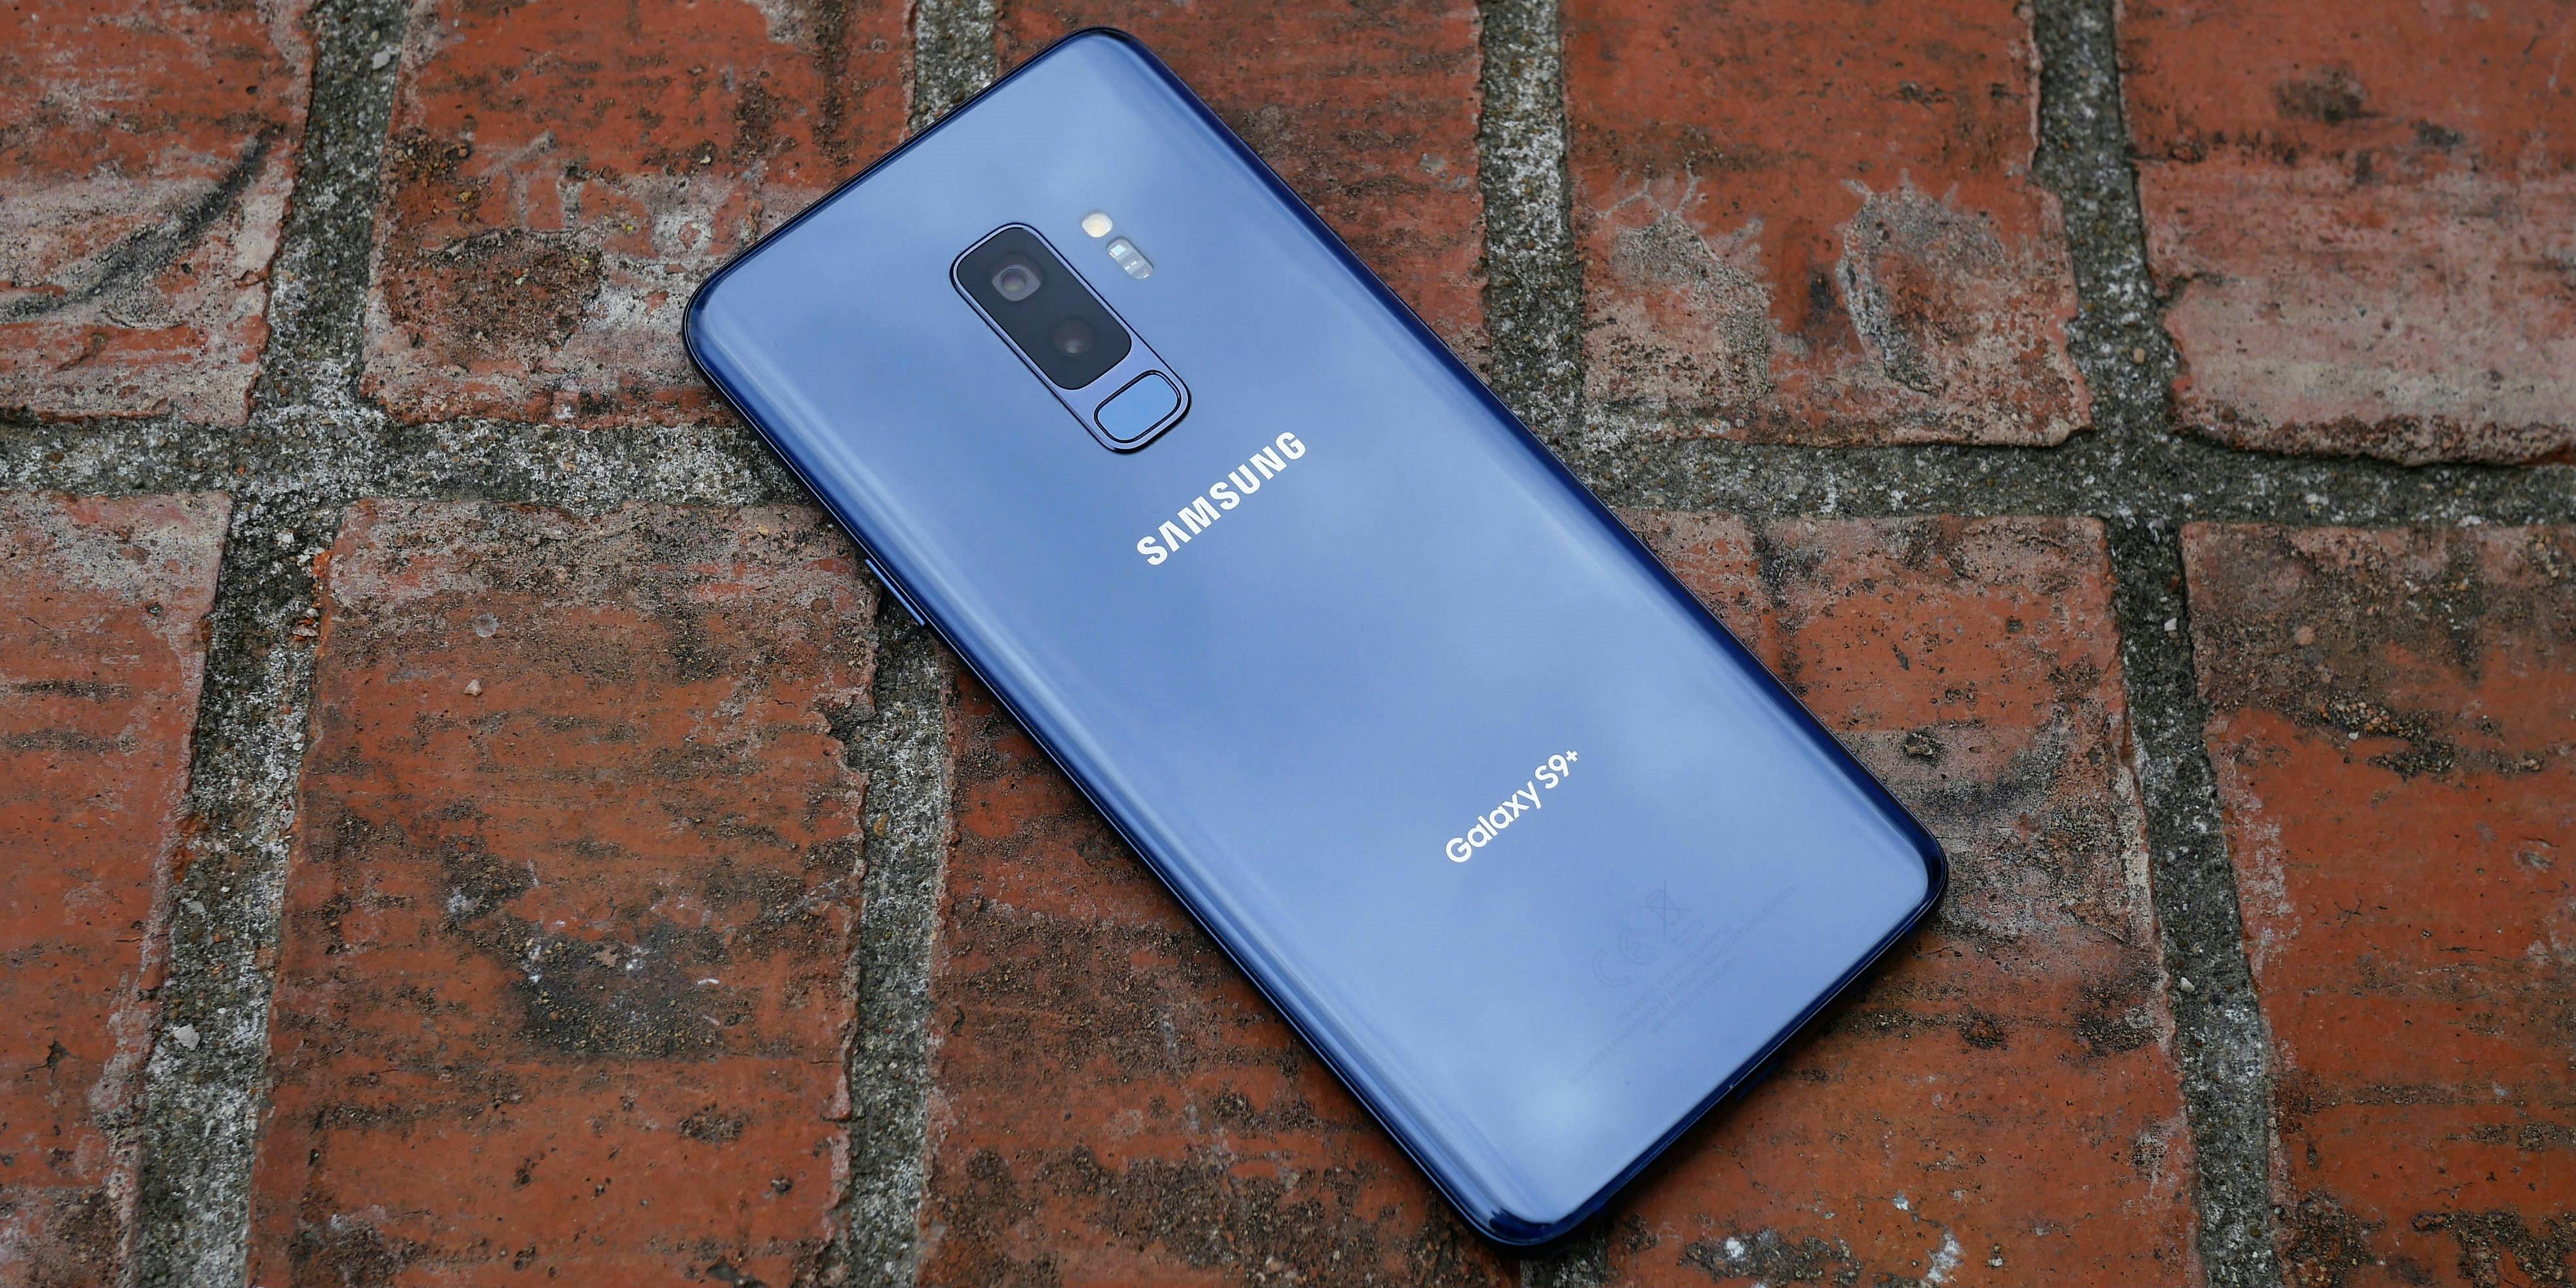 Samsung Galaxy S9 Review: The Price is Right